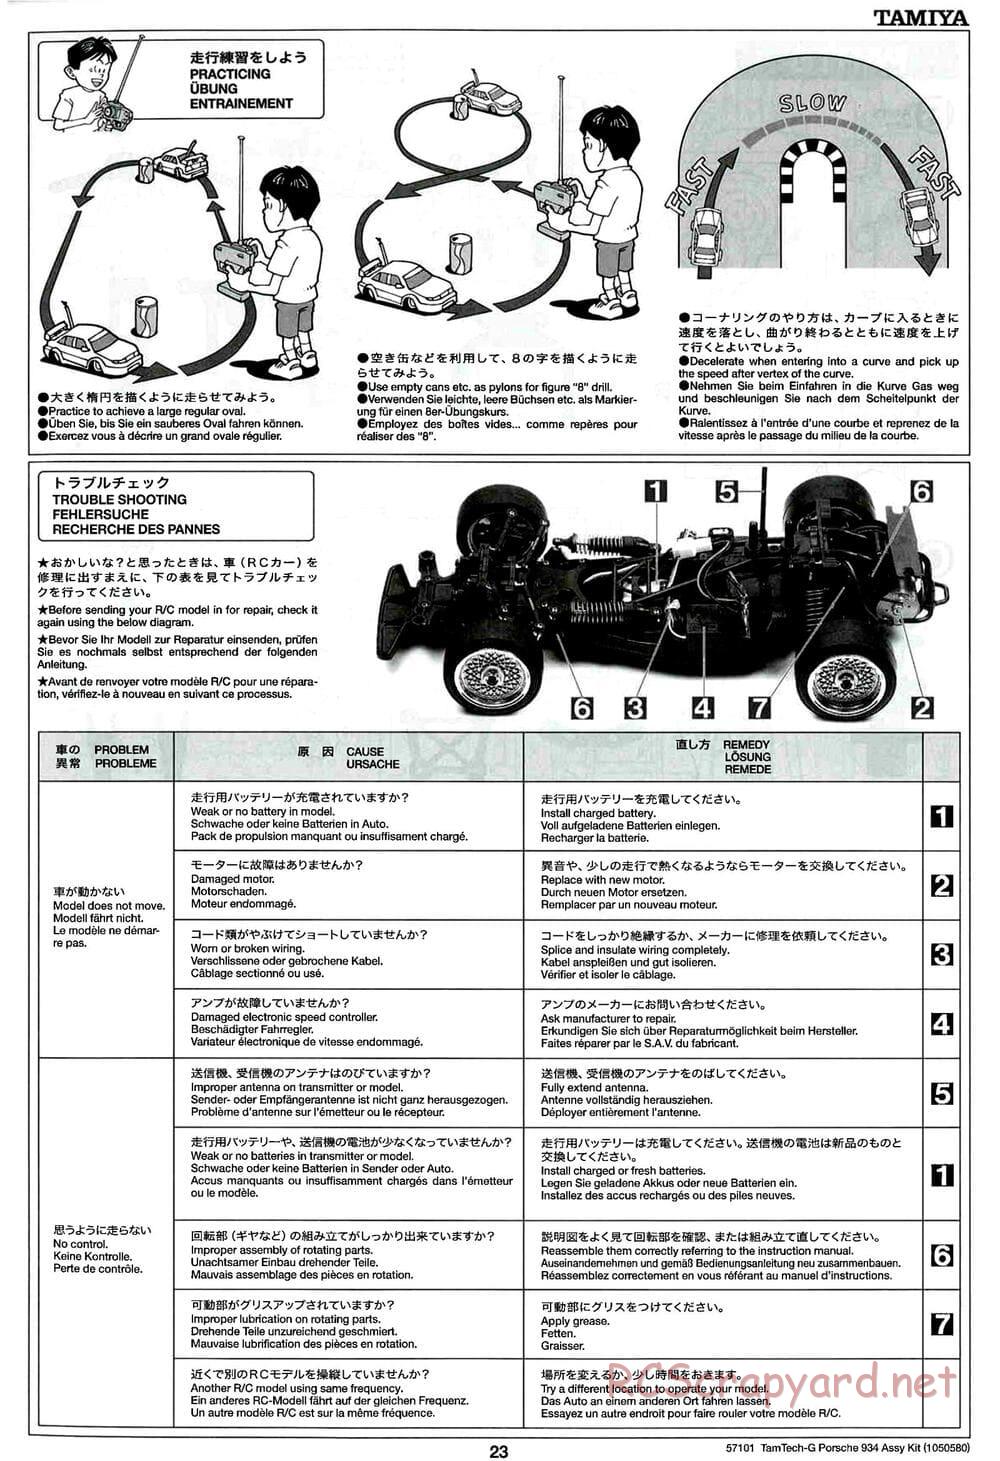 Tamiya - Porsche Turbo RSR - GT-01 Chassis - Manual - Page 23